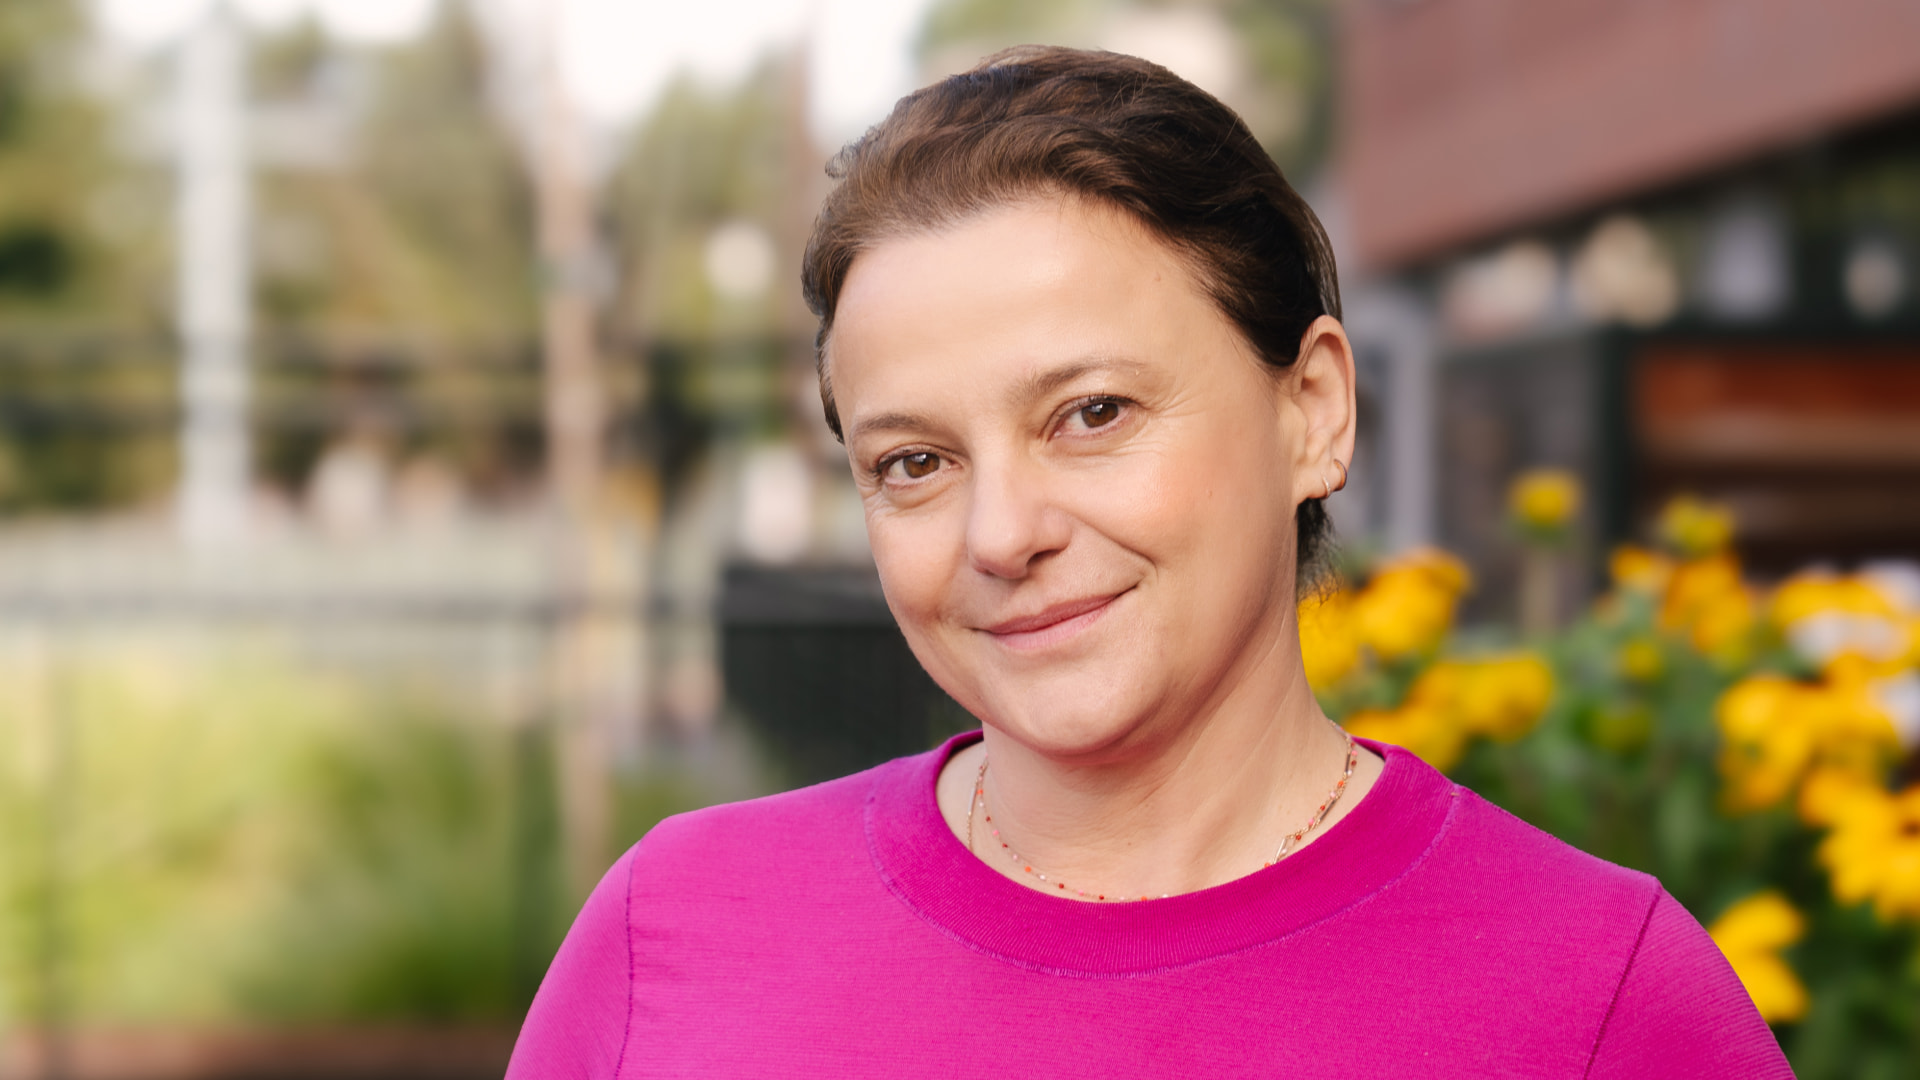 Dr. Raluca Kurz, wearing a hot pink sweater, looks directly at the camera and smiles; yellow flowers and CZI headquarters are in the background.